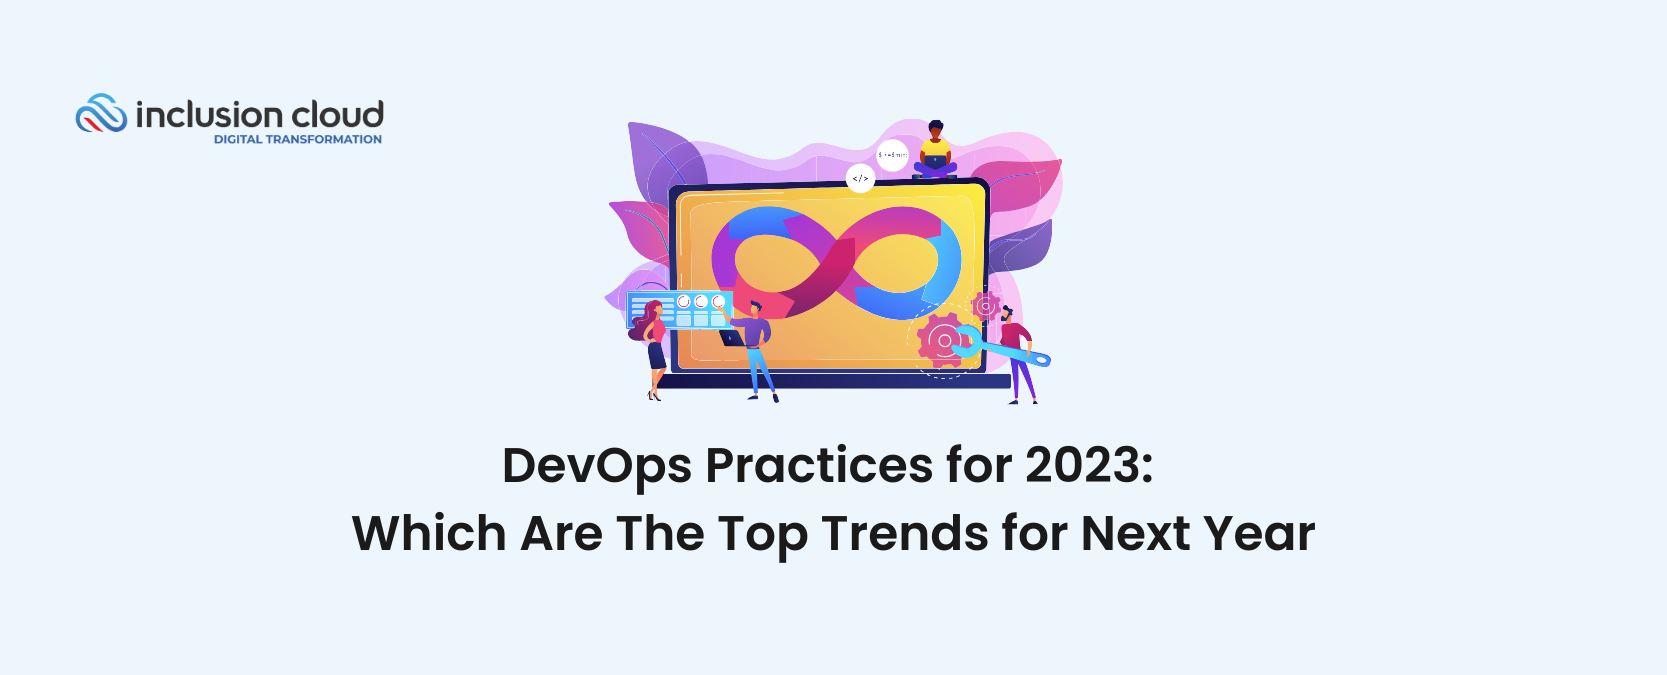 DevOps Practices for 2023 Which Are The Top Trends for Next Year